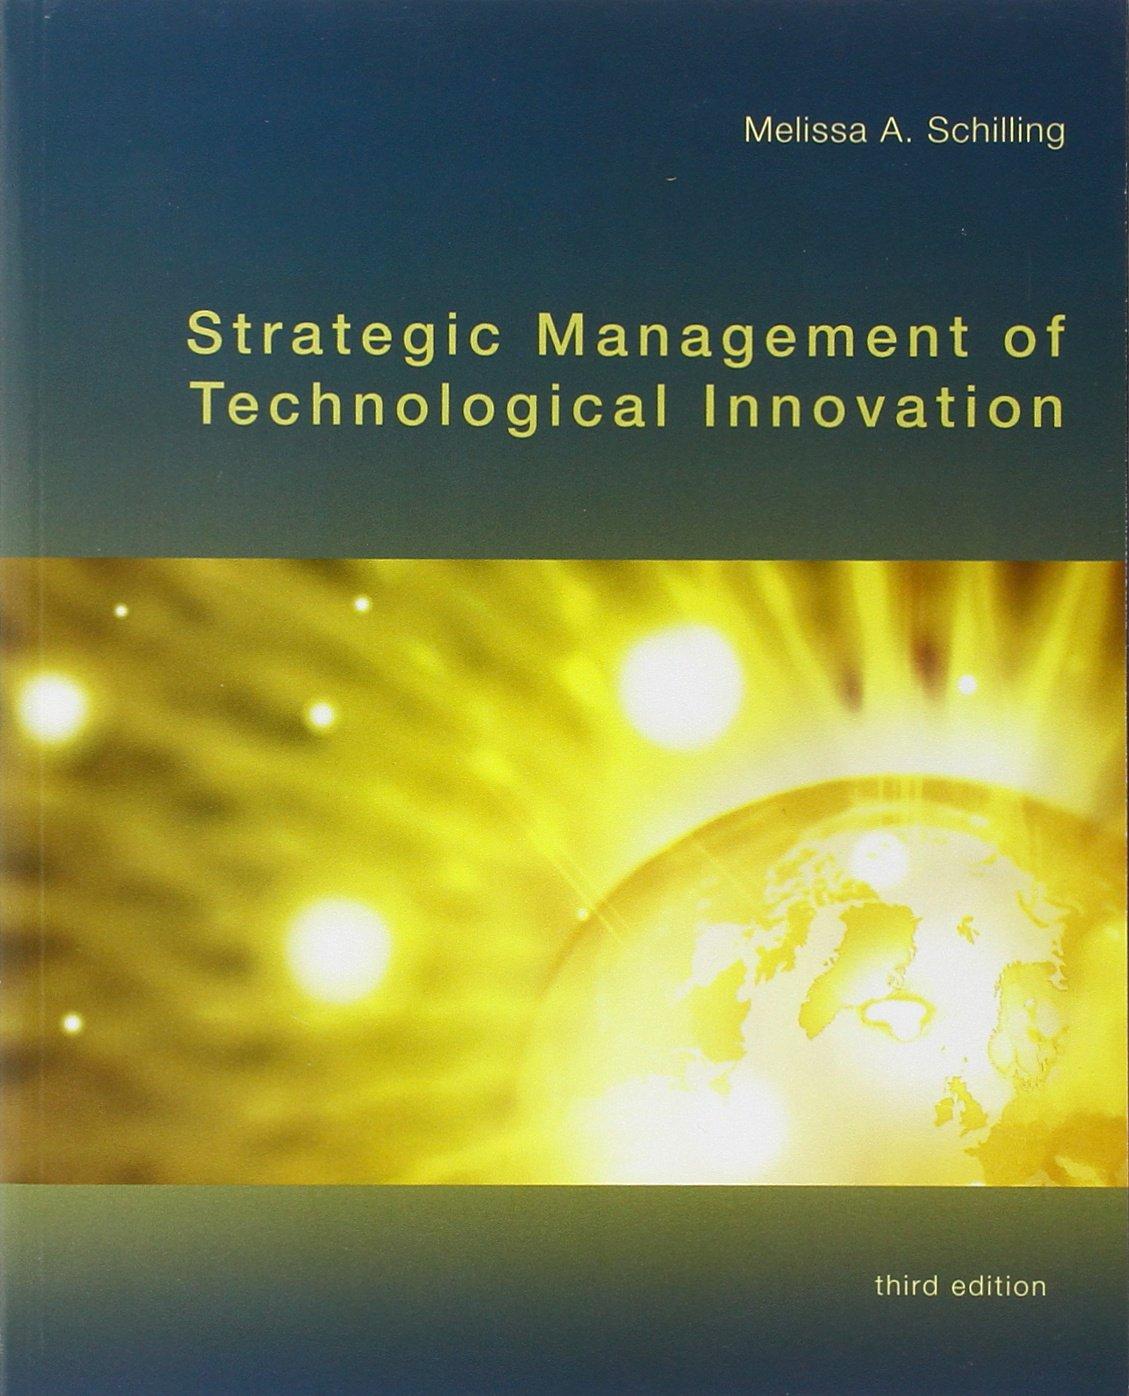 strategic management of technological innovation 3rd edition melissa a. schilling 007338156x, 978-0073381565